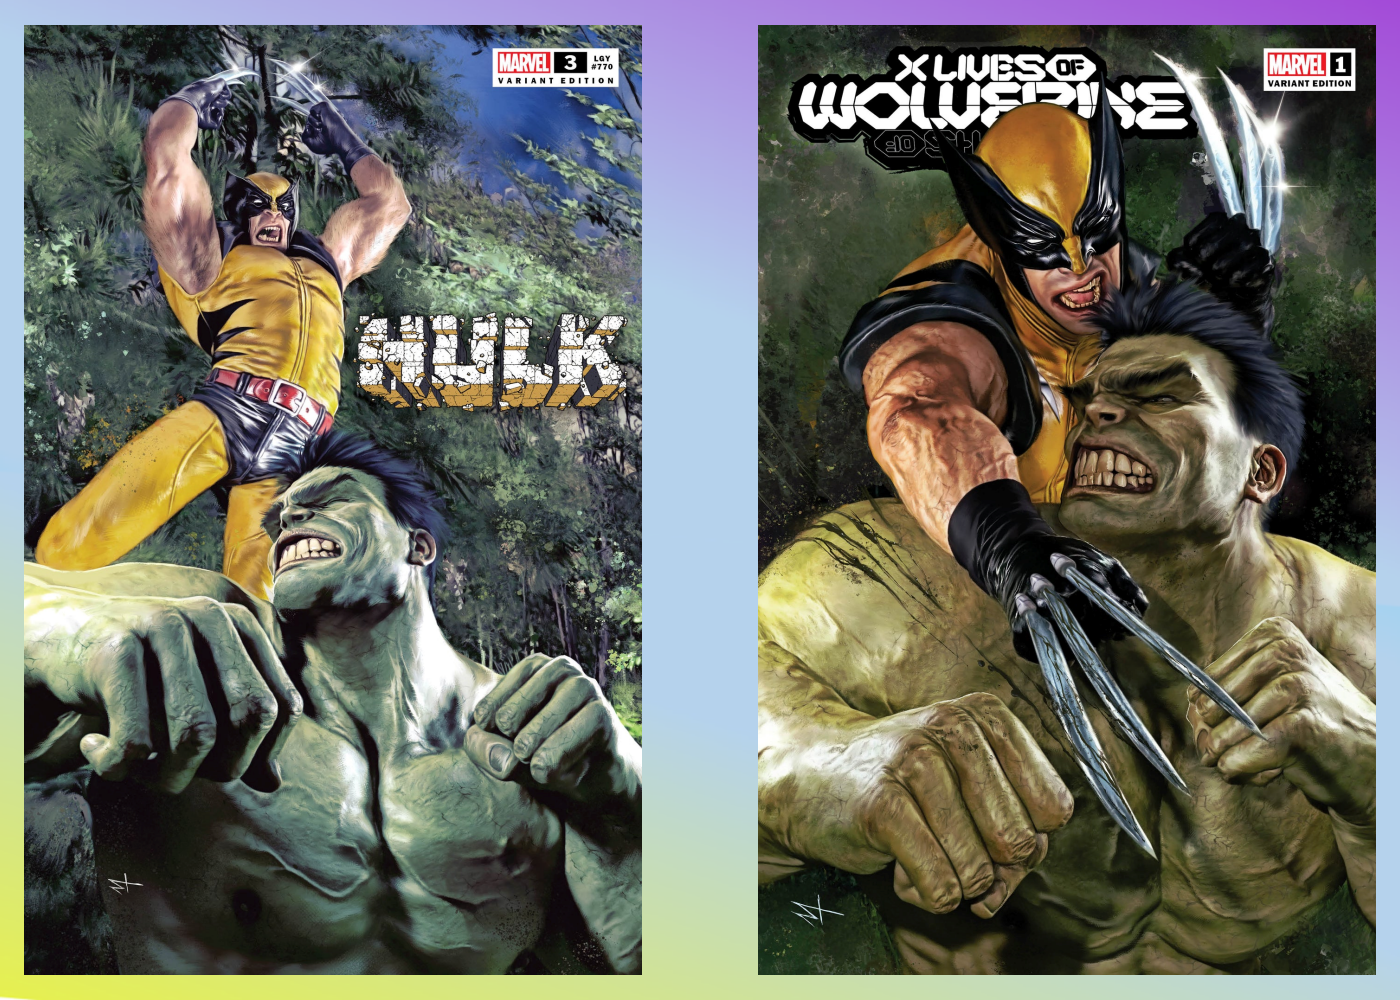 X Lives of Wolverine #1 And Hulk #3 The 616 Exclusive Variants Set By Marco Turini Pre-Order Deposit